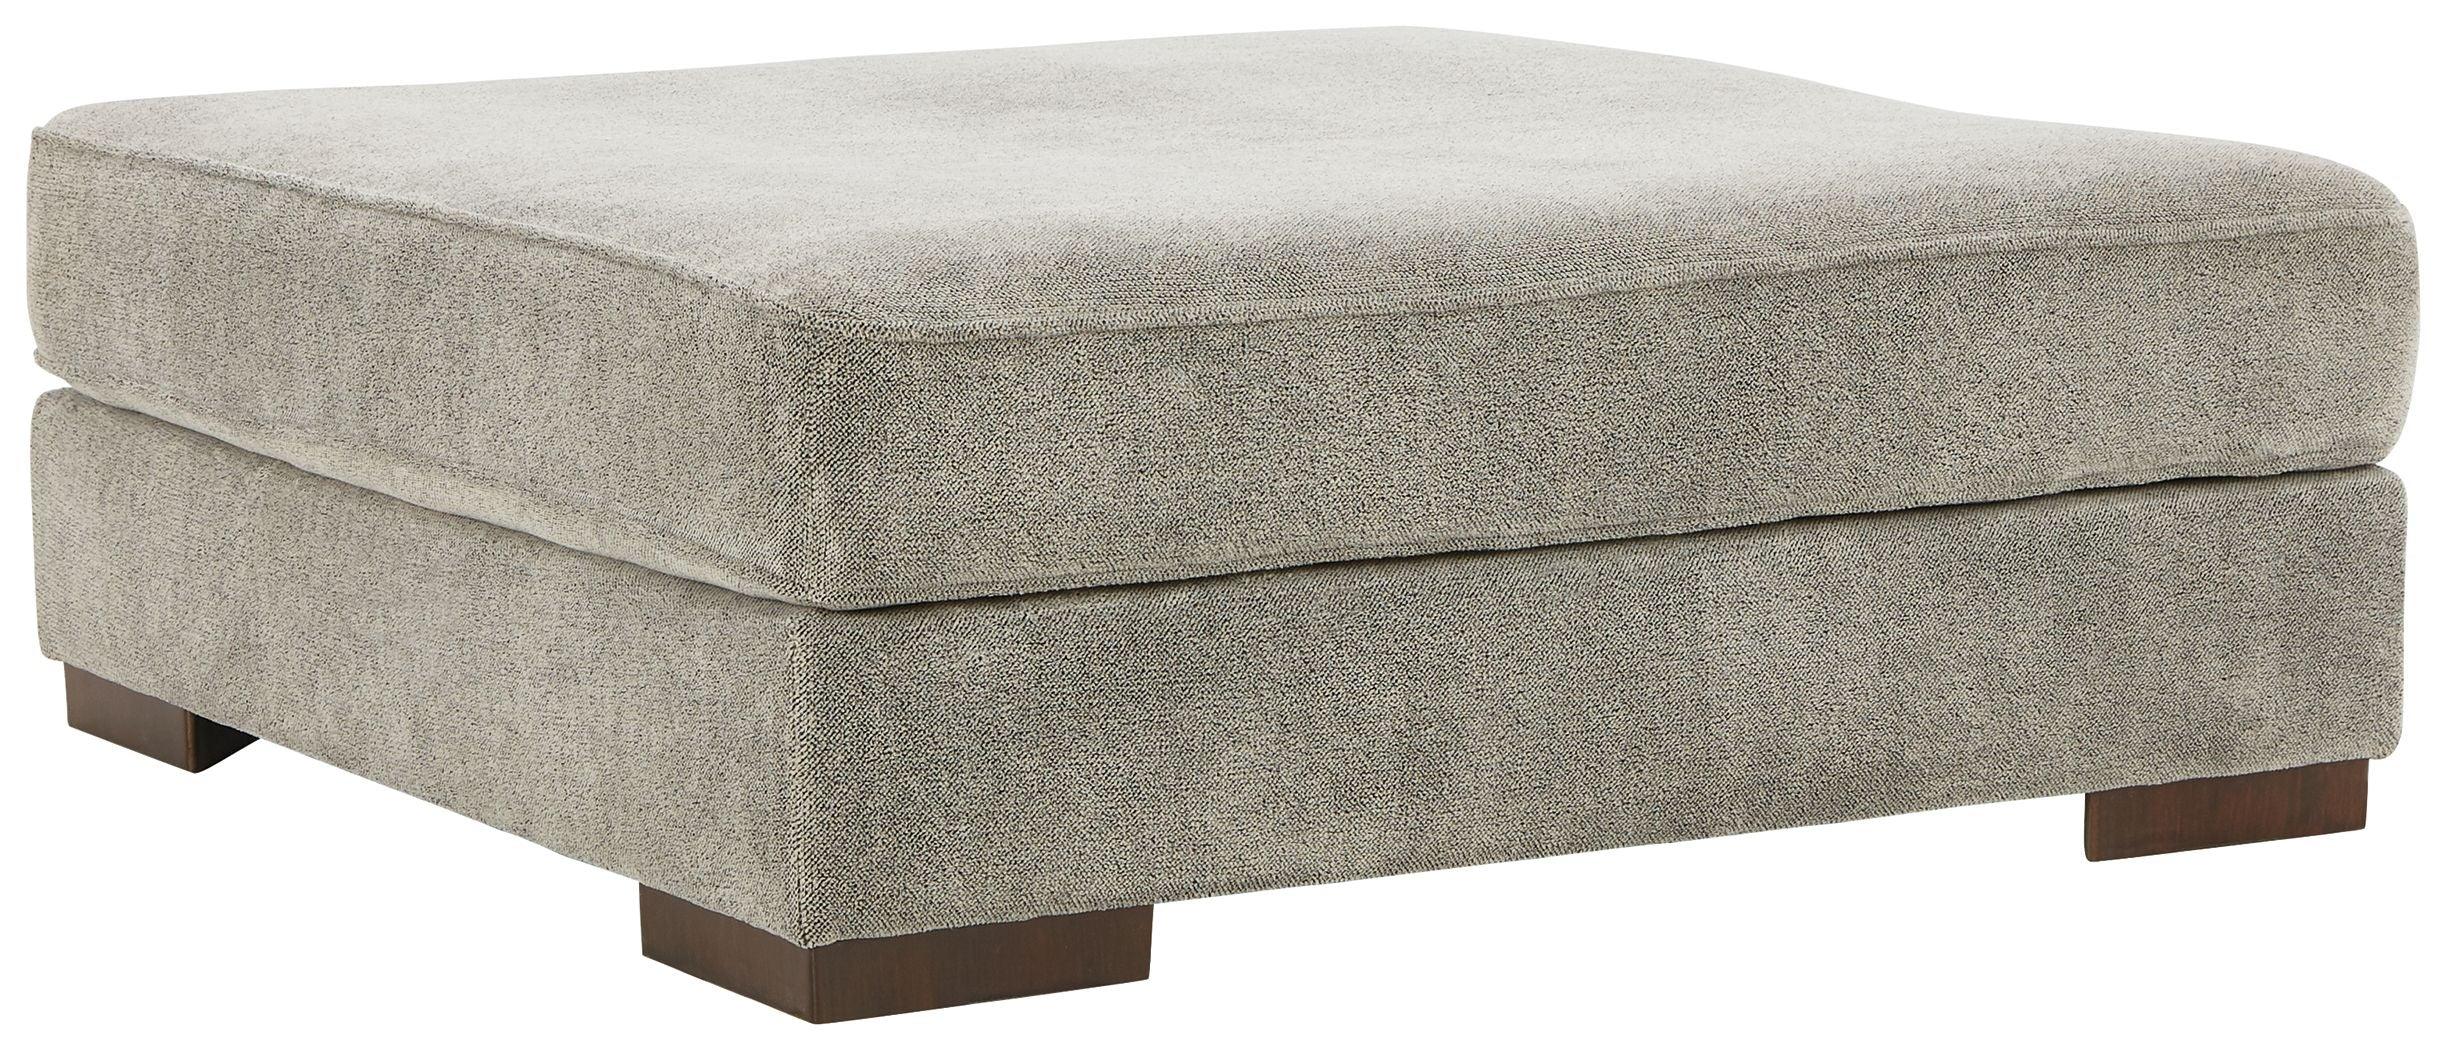 Signature Design by Ashley® - Bayless - Smoke - Oversized Accent Ottoman - 5th Avenue Furniture